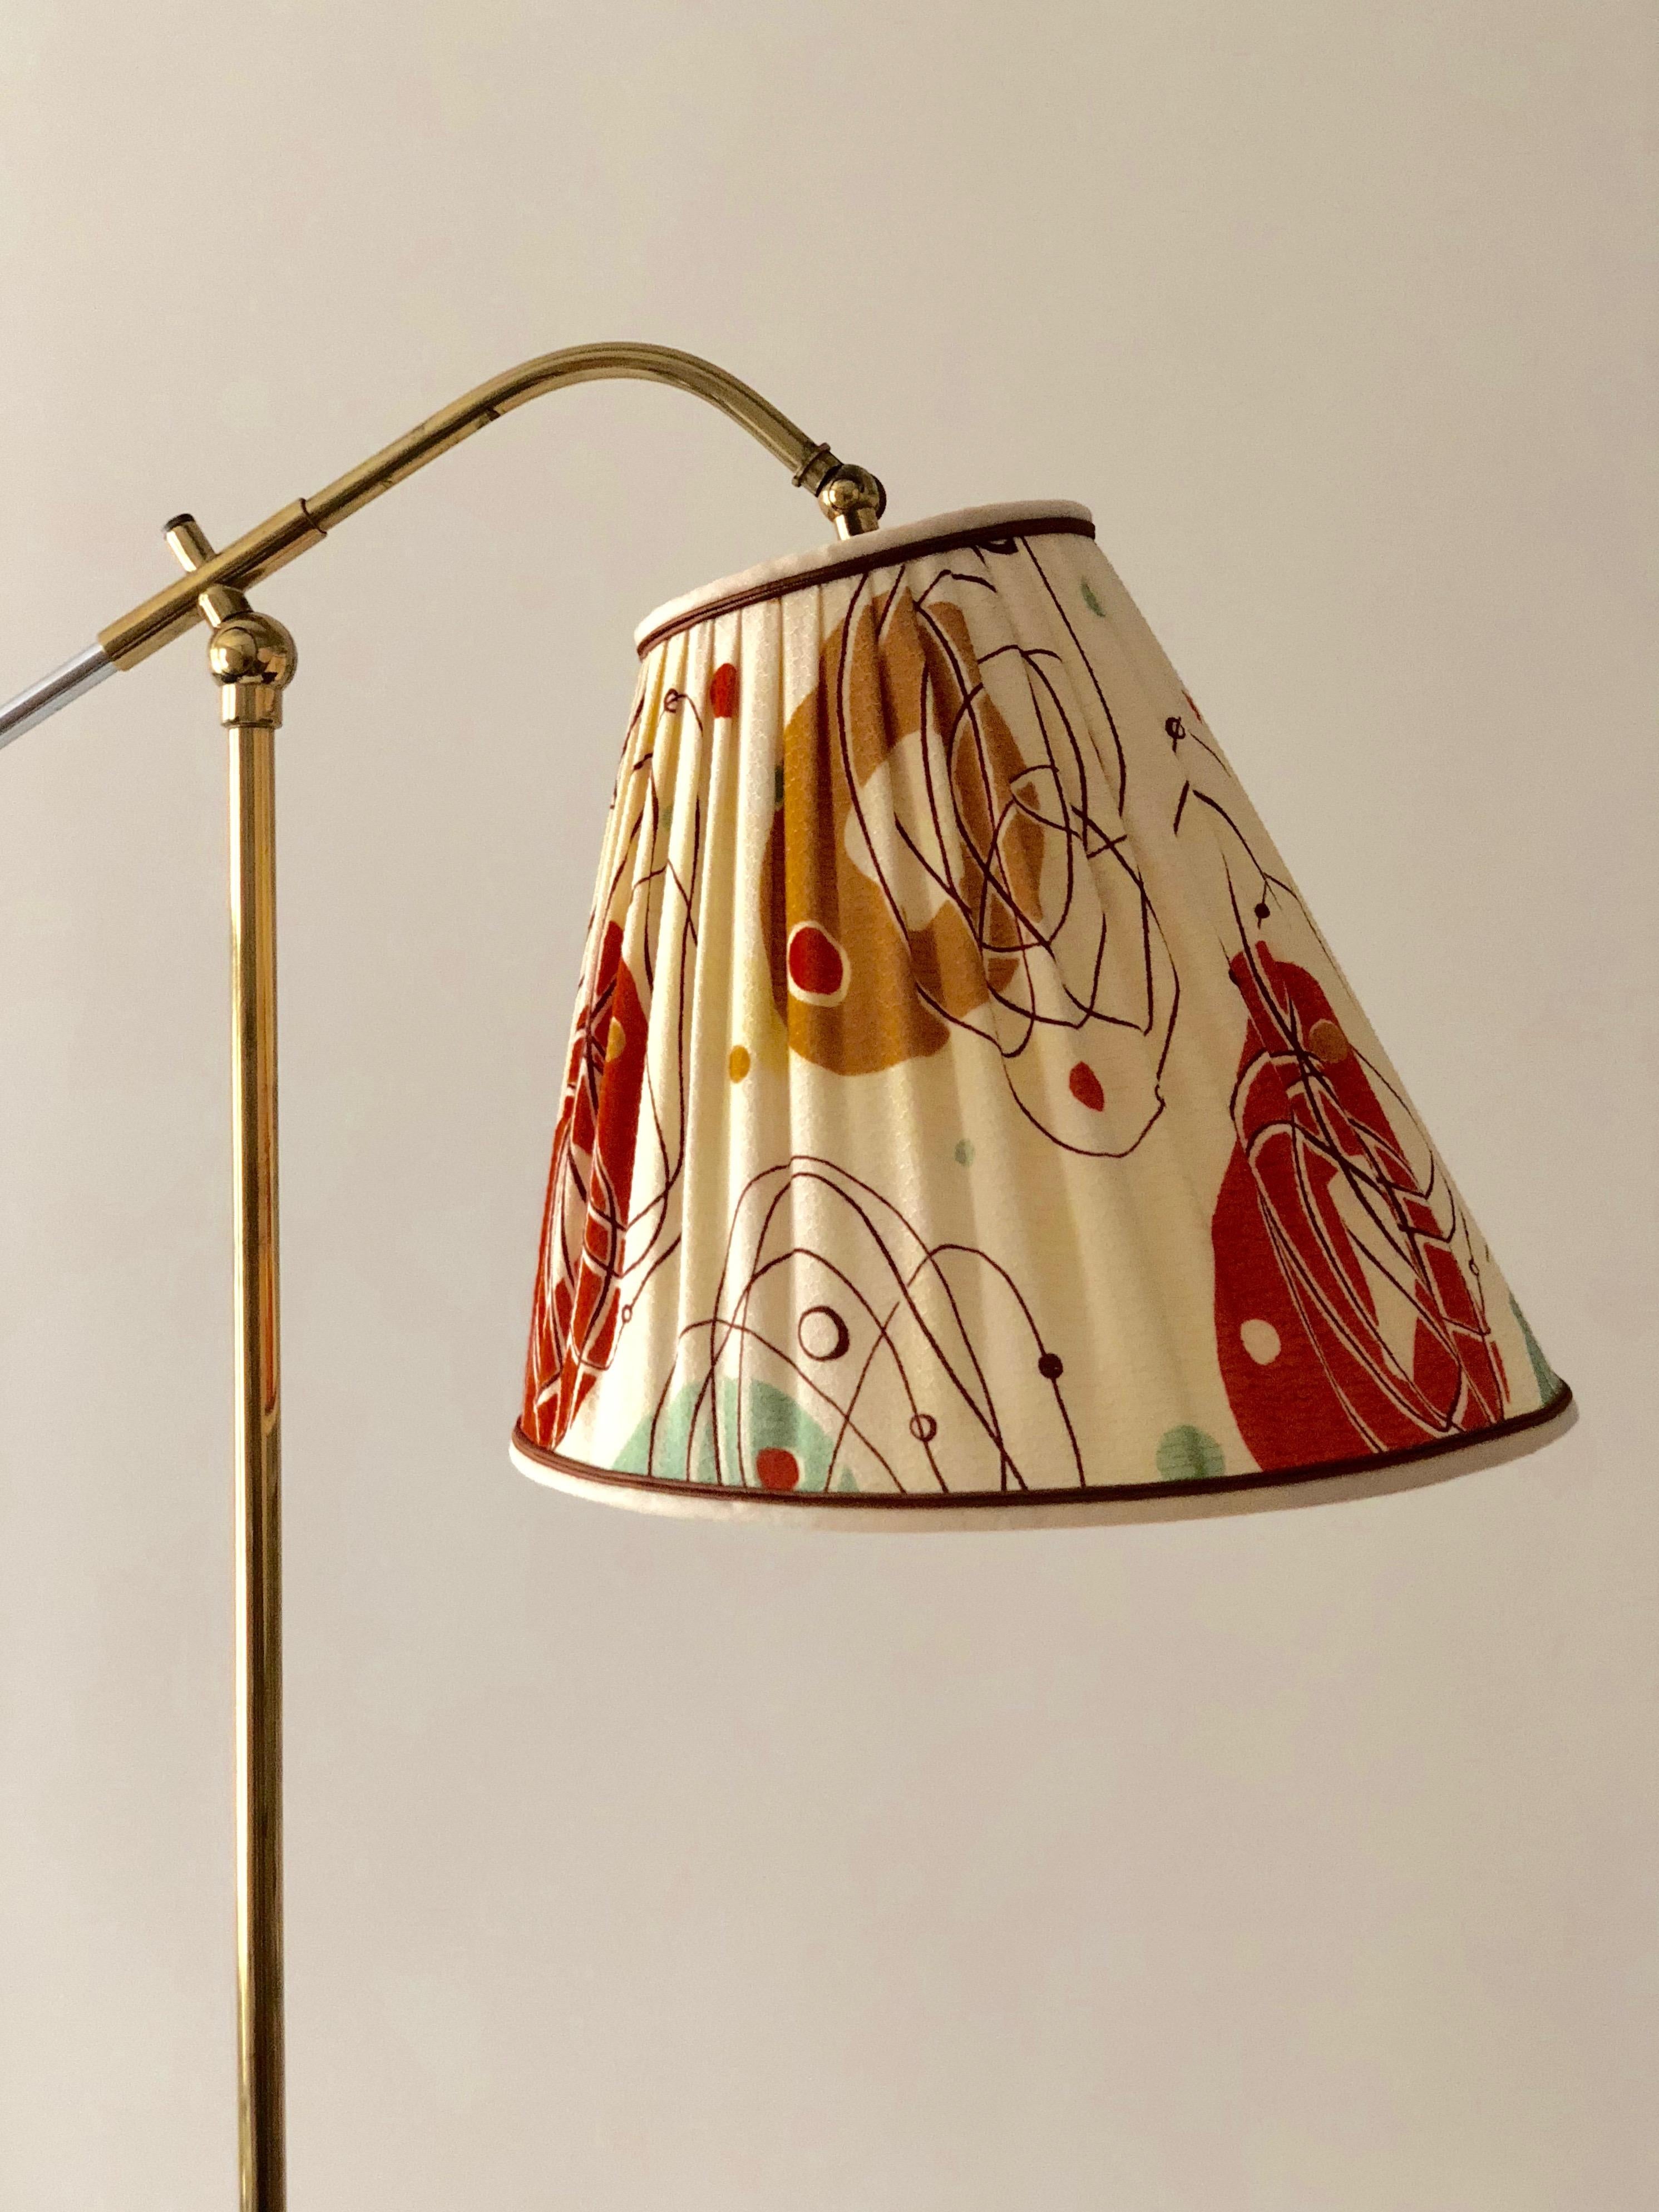 This midcentury, brass floor lamp from Rupert Nikoll was made in the 1950s. It is full of details, such as the cone shaped foot, the swivel joint
at the top of the column for tilting the lamp, an additional swivel joint at the top of the shade for